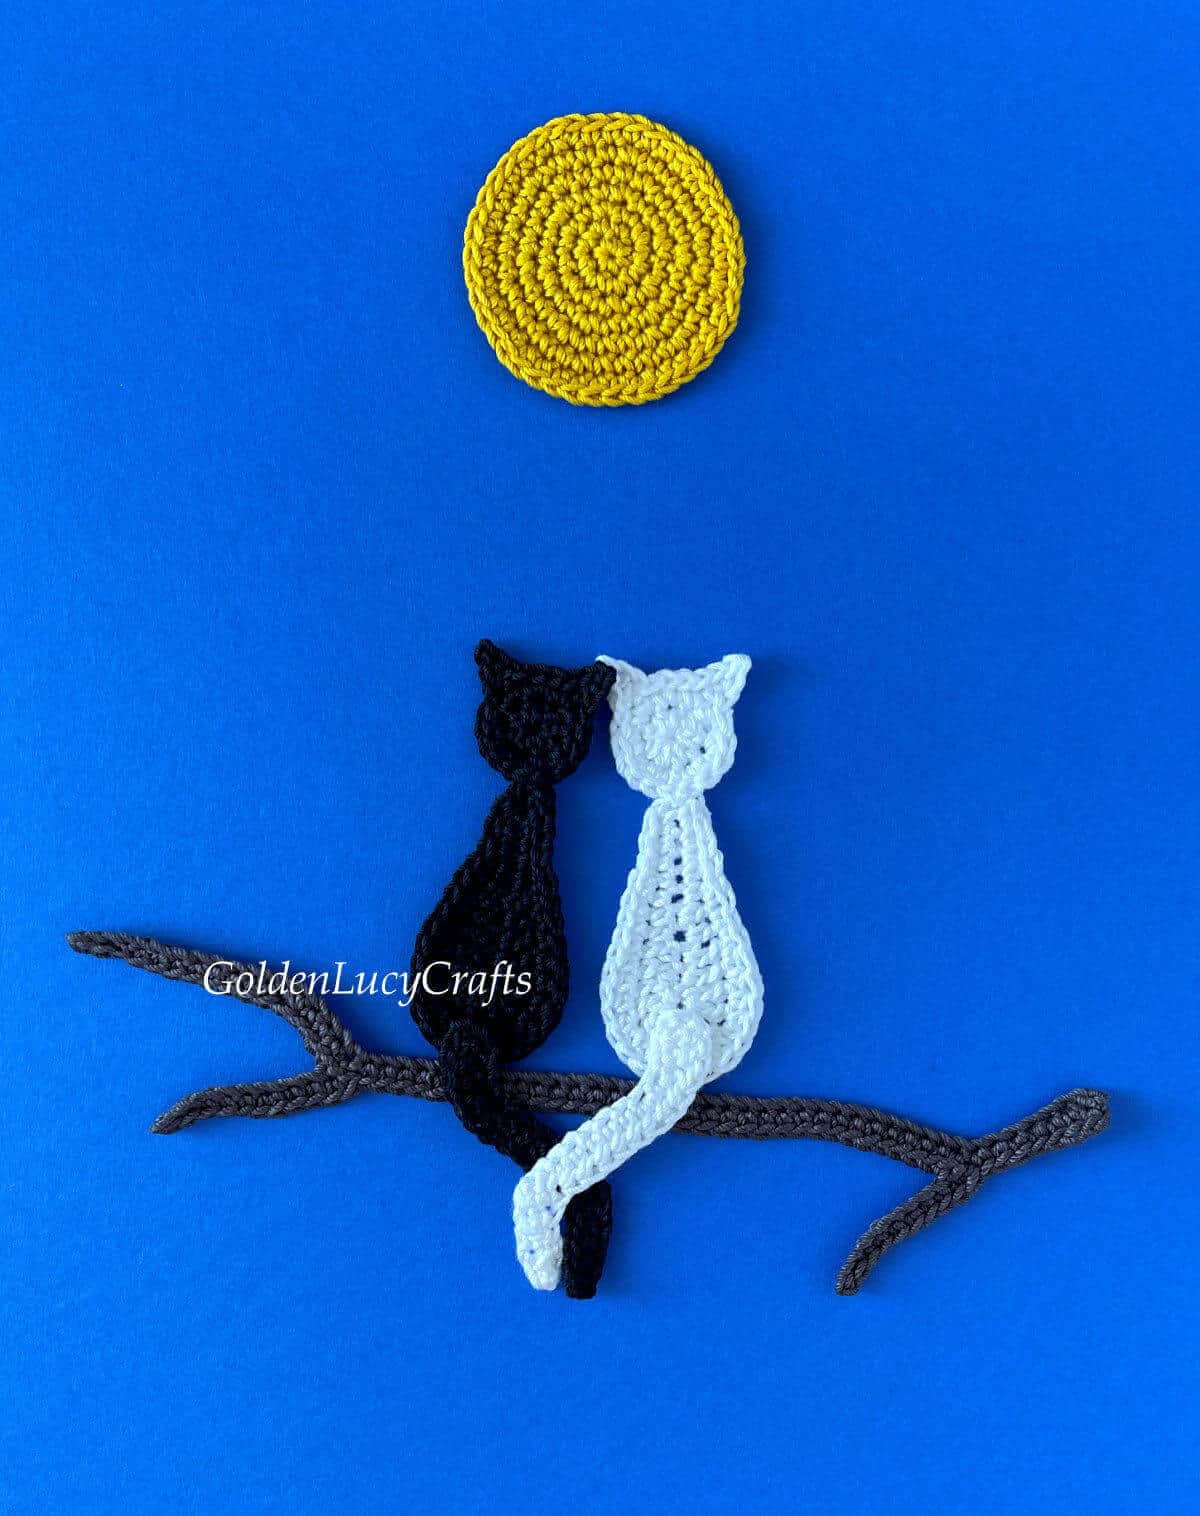 Crocheted two cats in love sitting on a tree branch under a full moon on dark blue background.